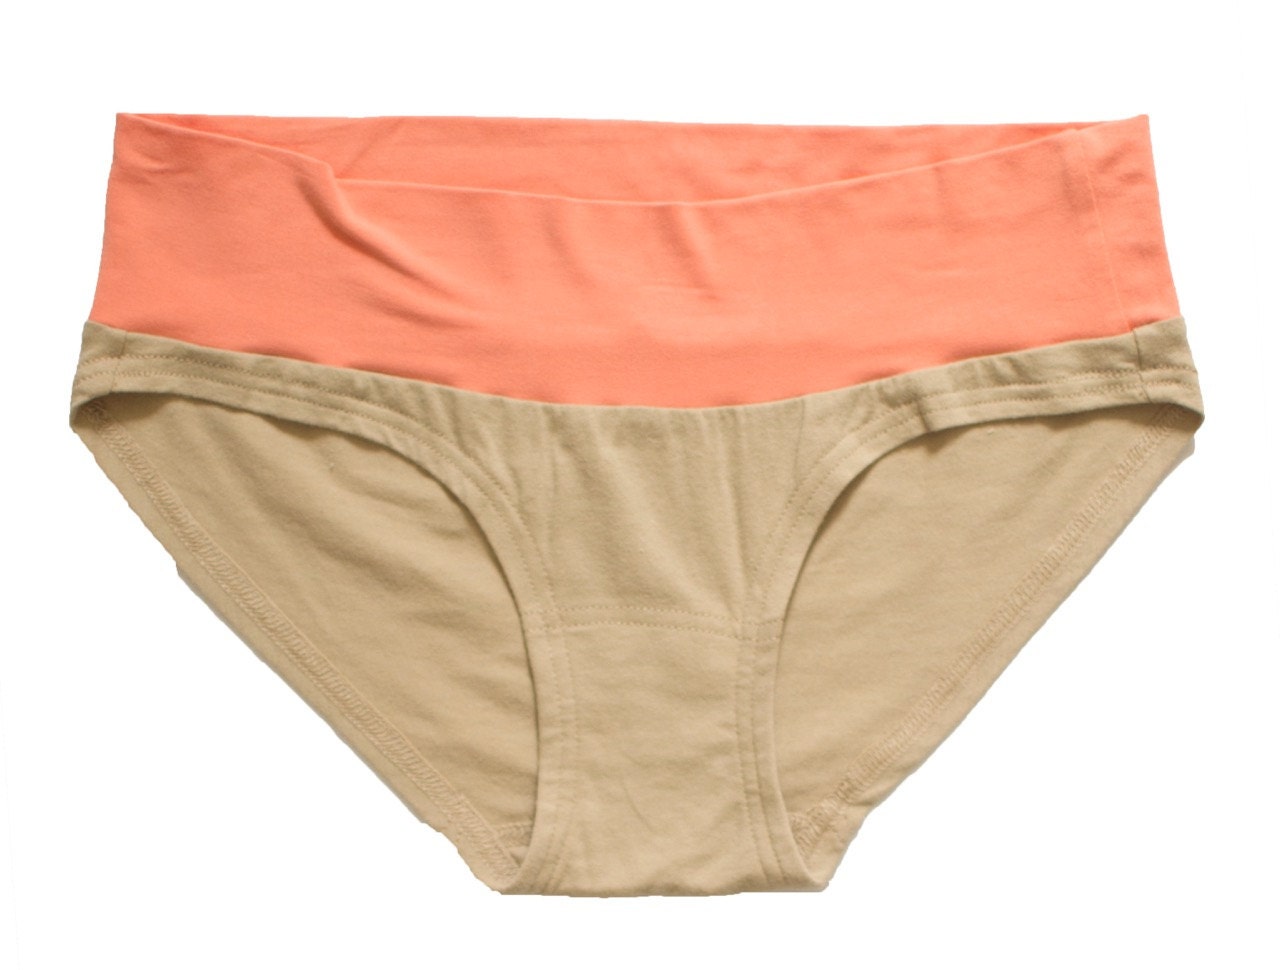 Wide band panty Beige organic cotton Peach bamboo